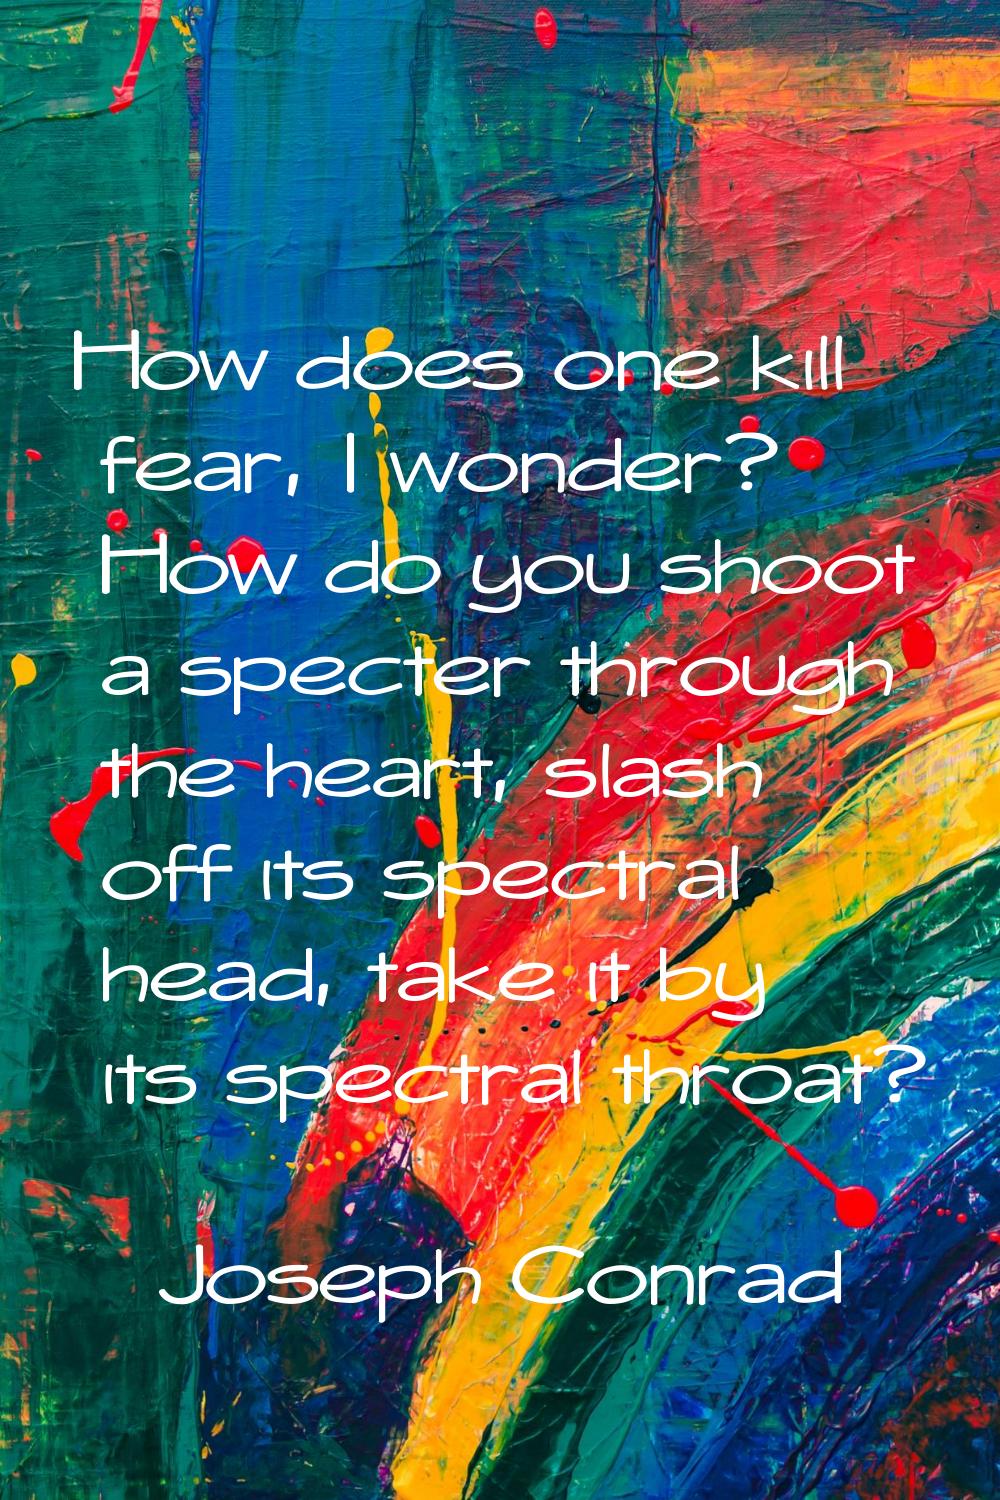 How does one kill fear, I wonder? How do you shoot a specter through the heart, slash off its spect